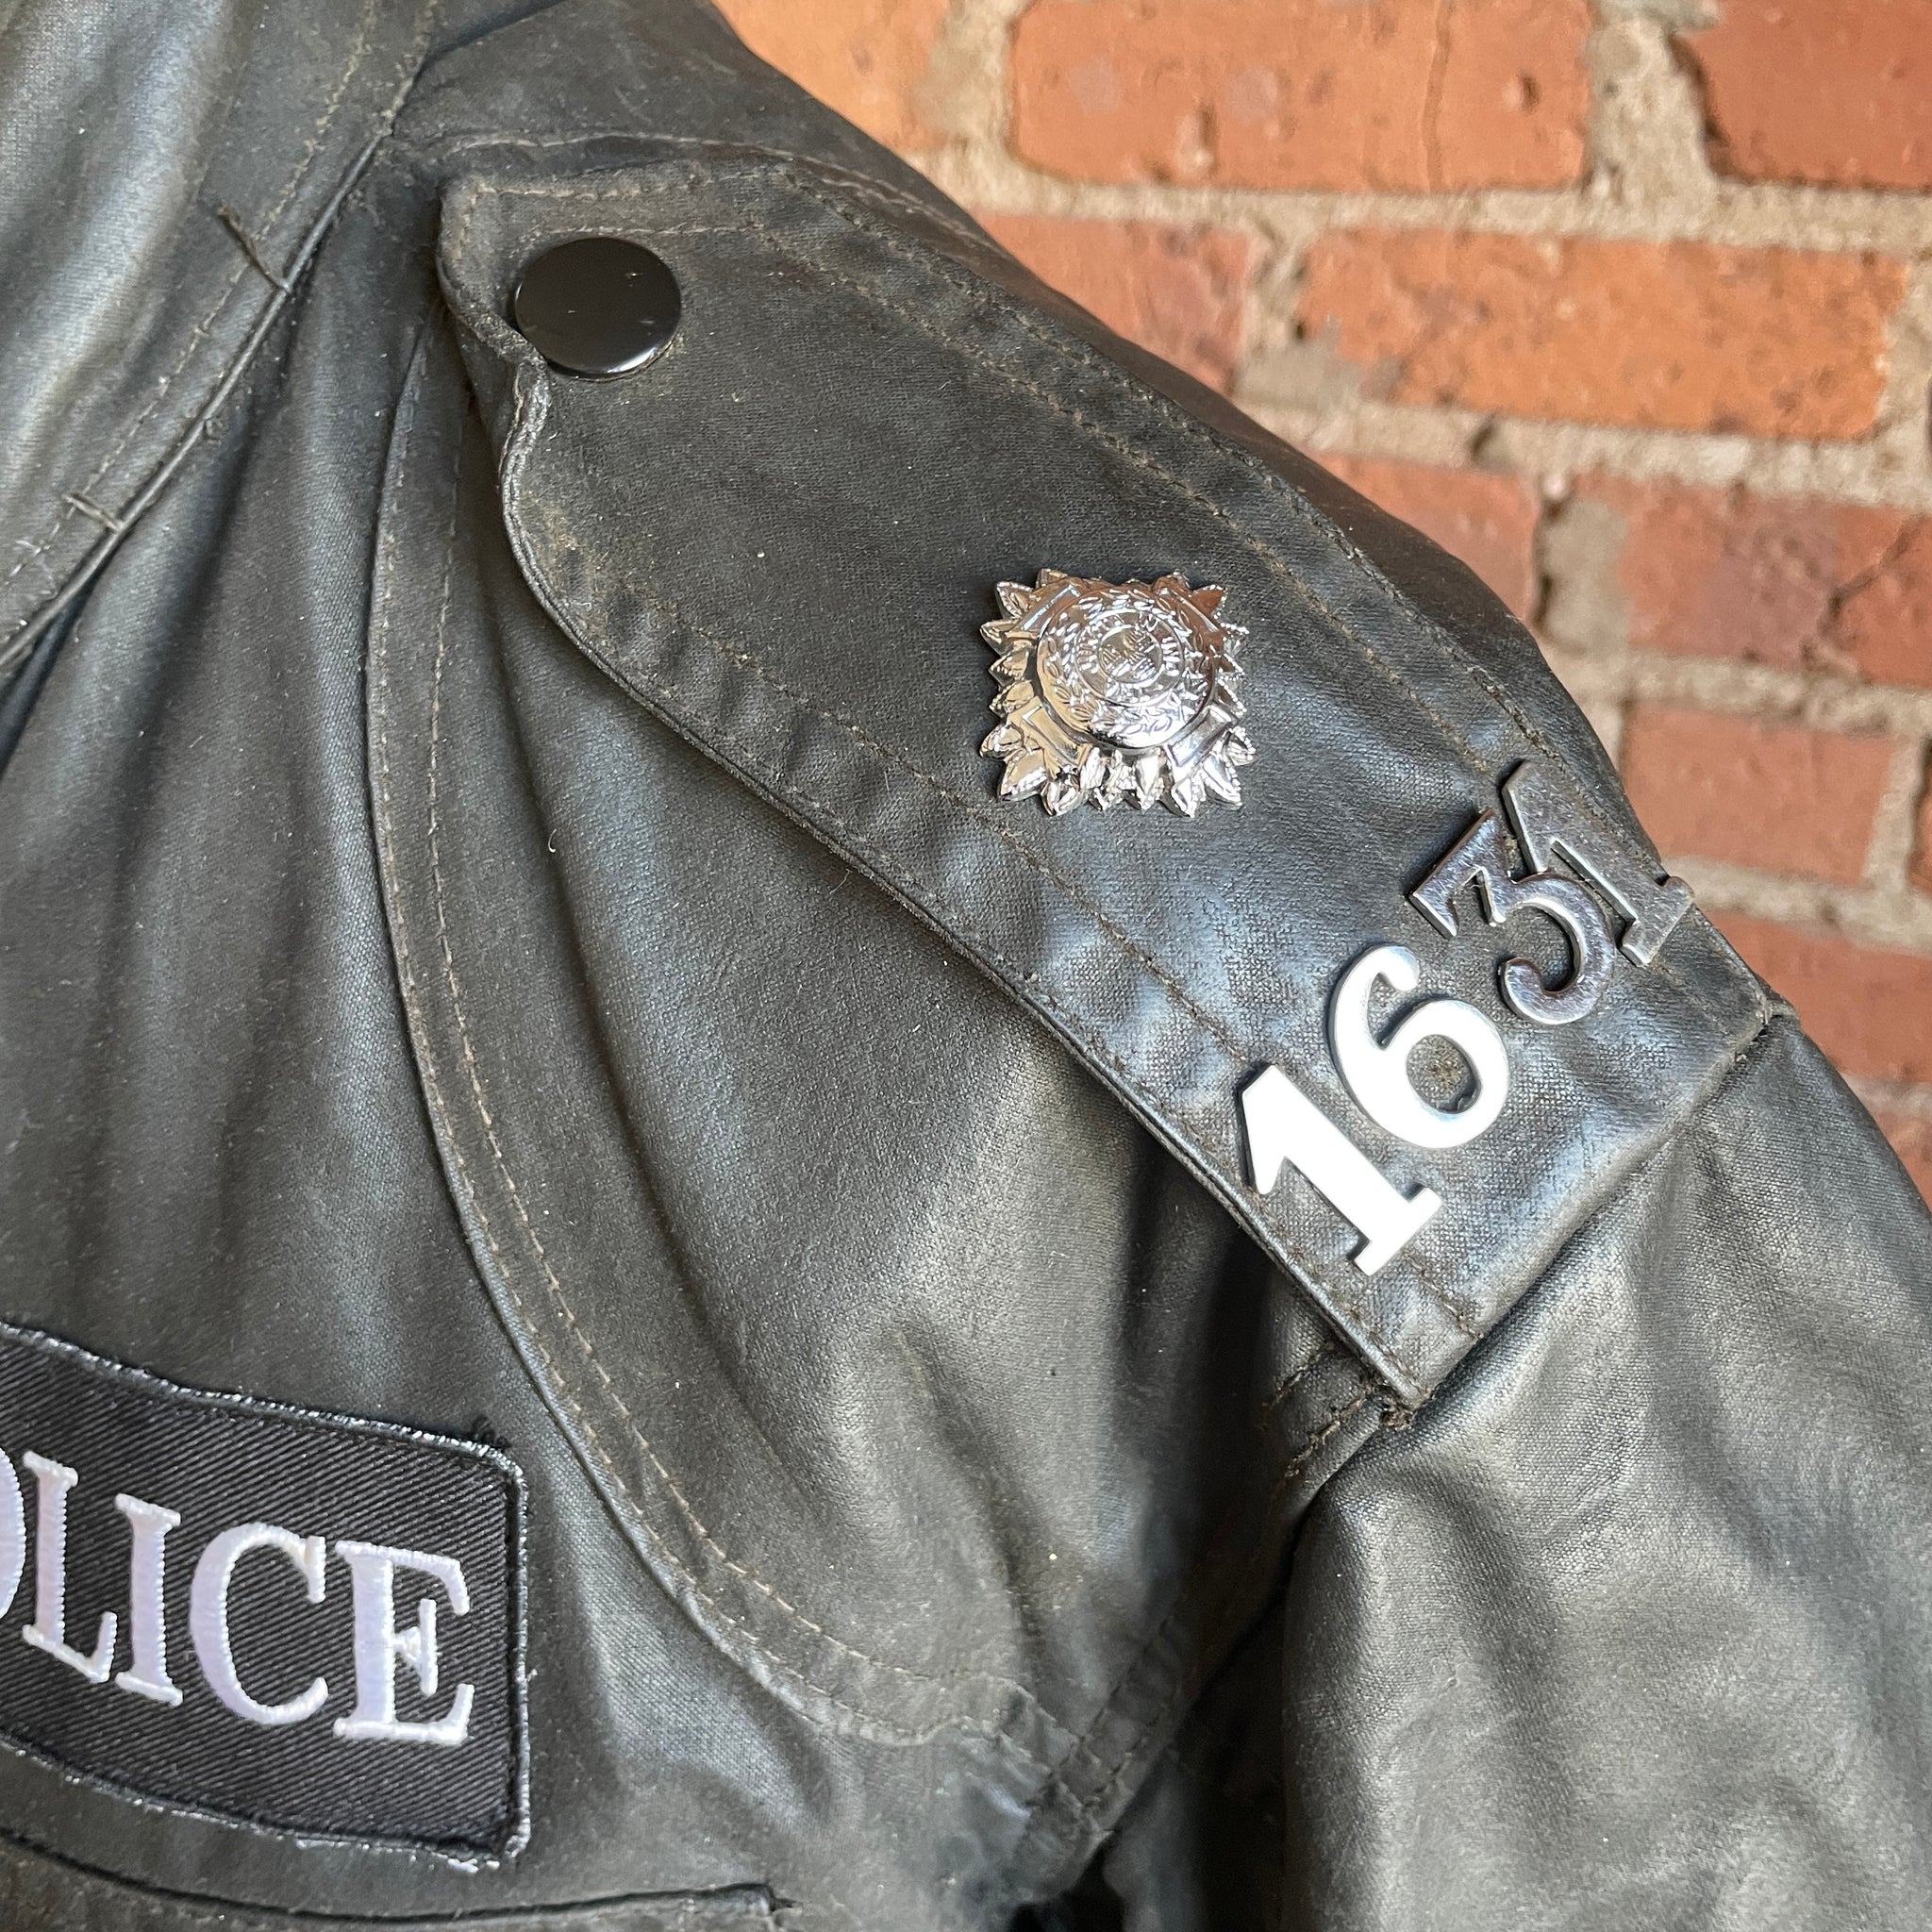 Belstaff 1960s Police Issue Trialmaster – The Major's Tailor